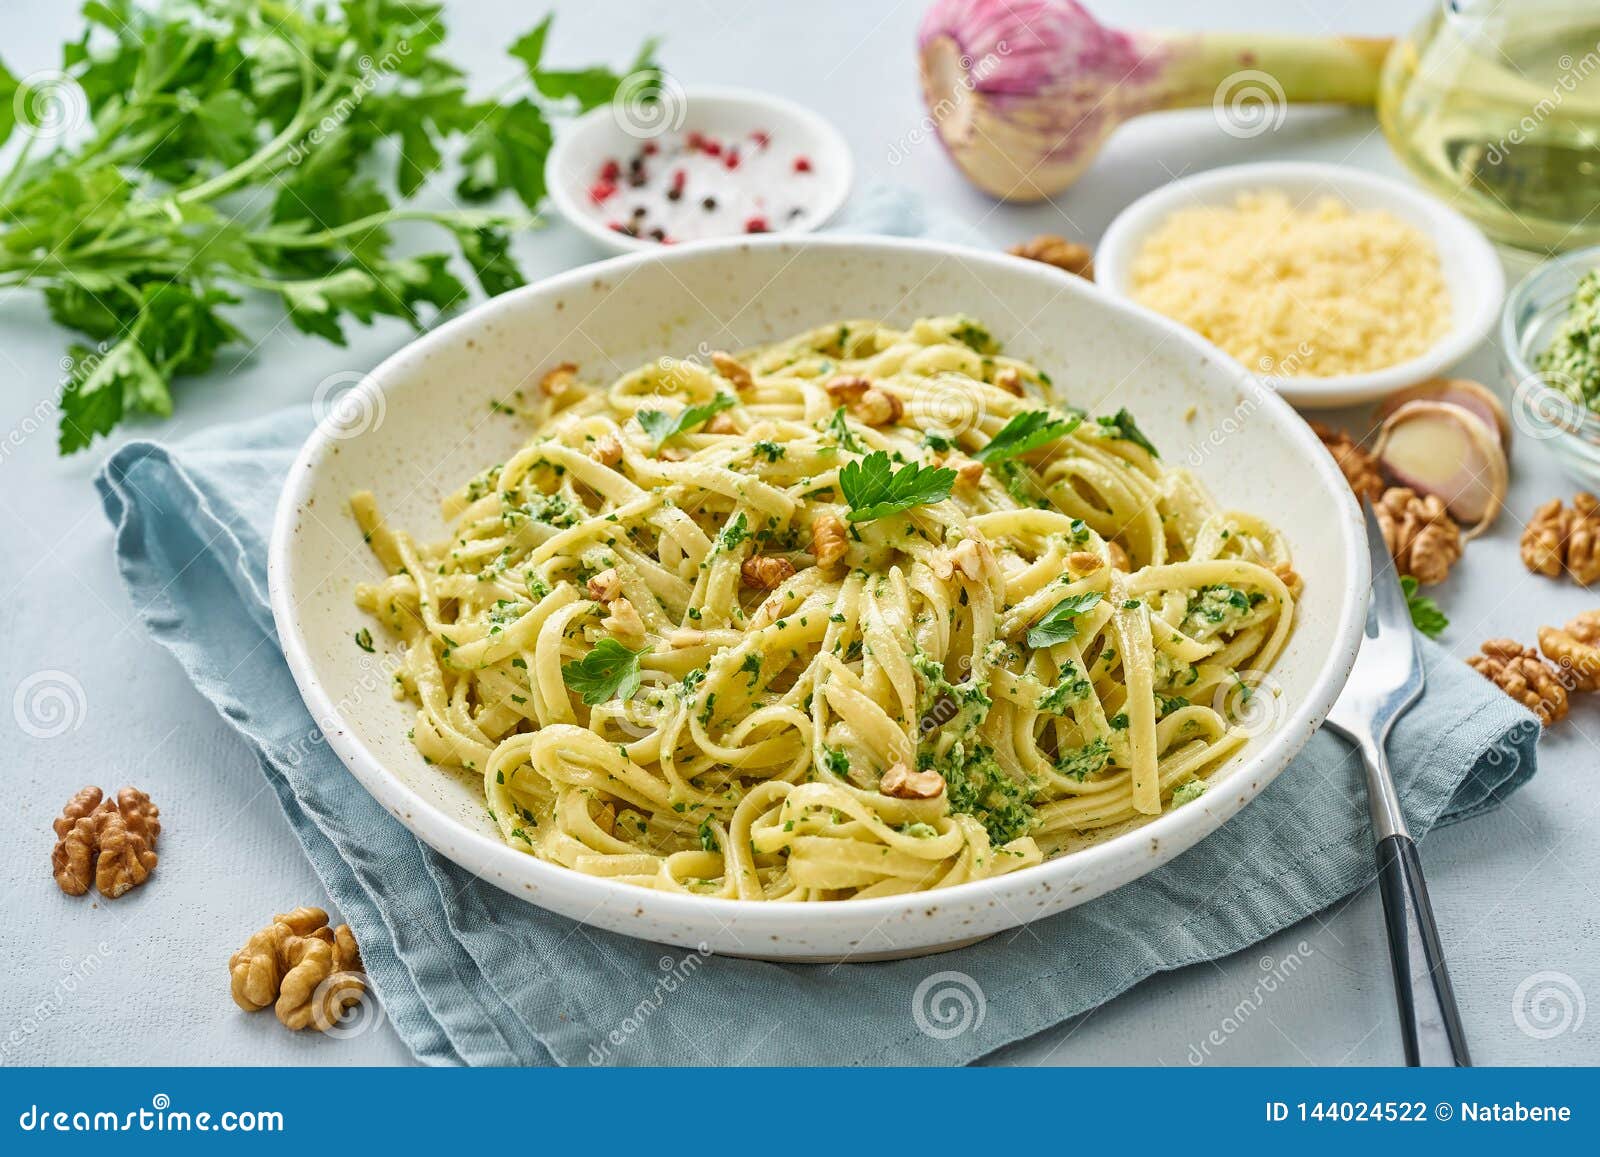 pesto pasta, bavette with walnuts, parsley, garlic, nuts, olive oil. side view, close-up, blue background.